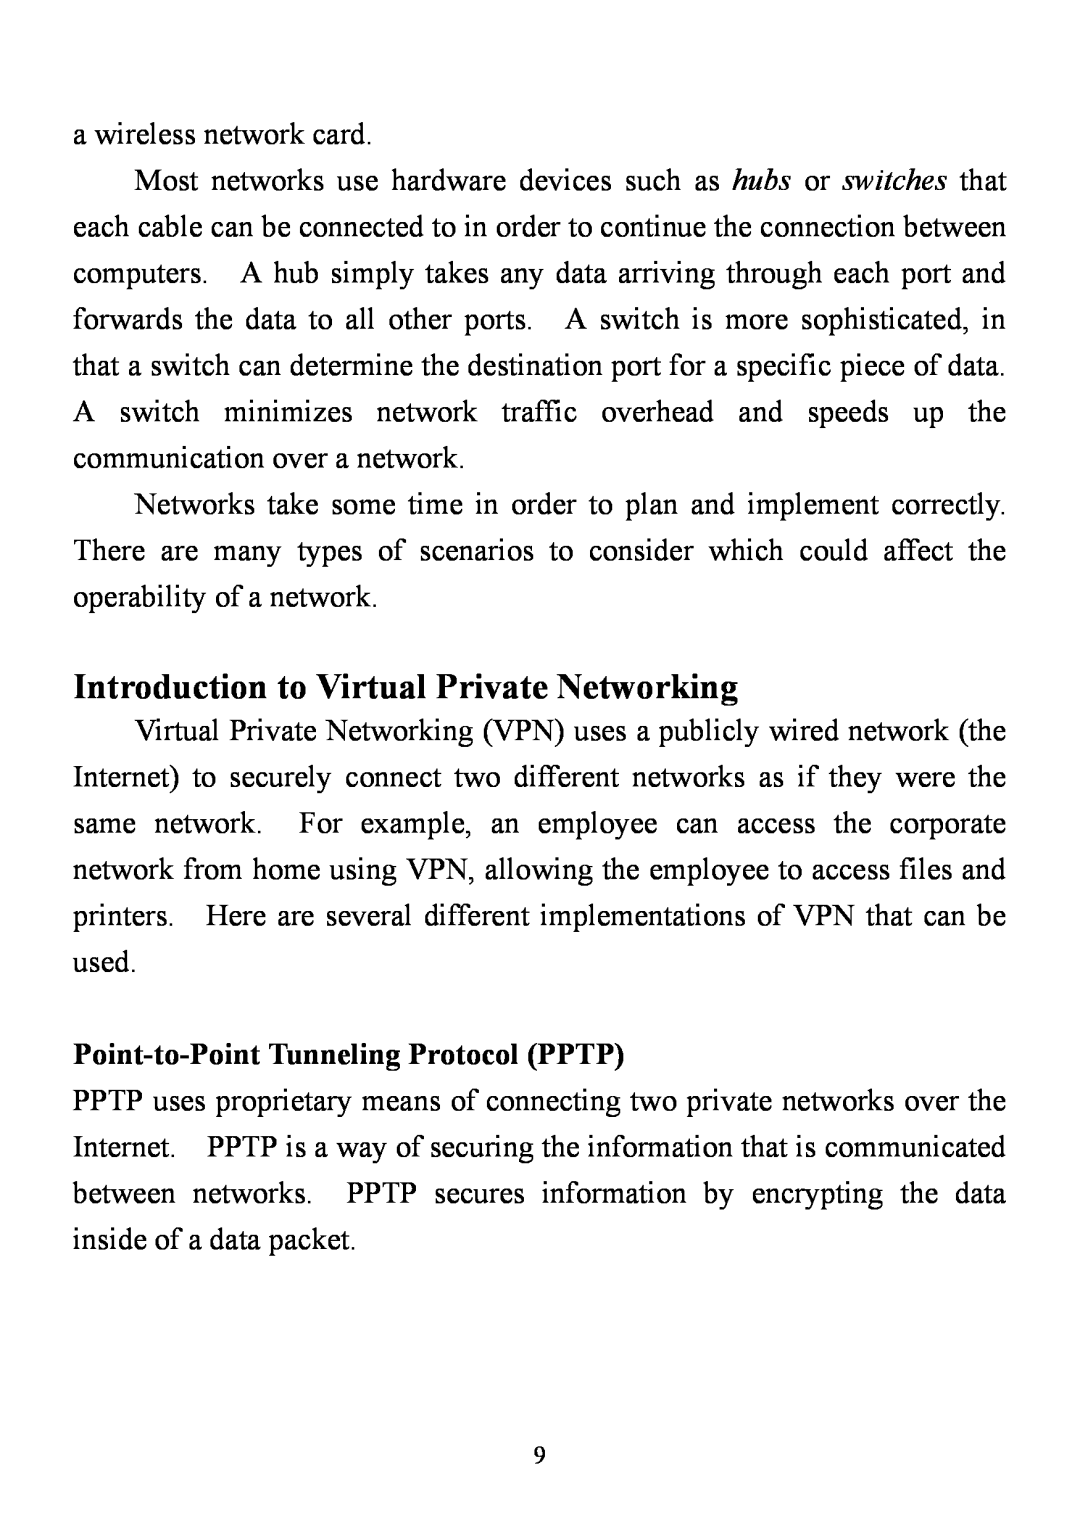 D-Link DI-714 user manual Introduction to Virtual Private Networking, Point-to-Point Tunneling Protocol PPTP 